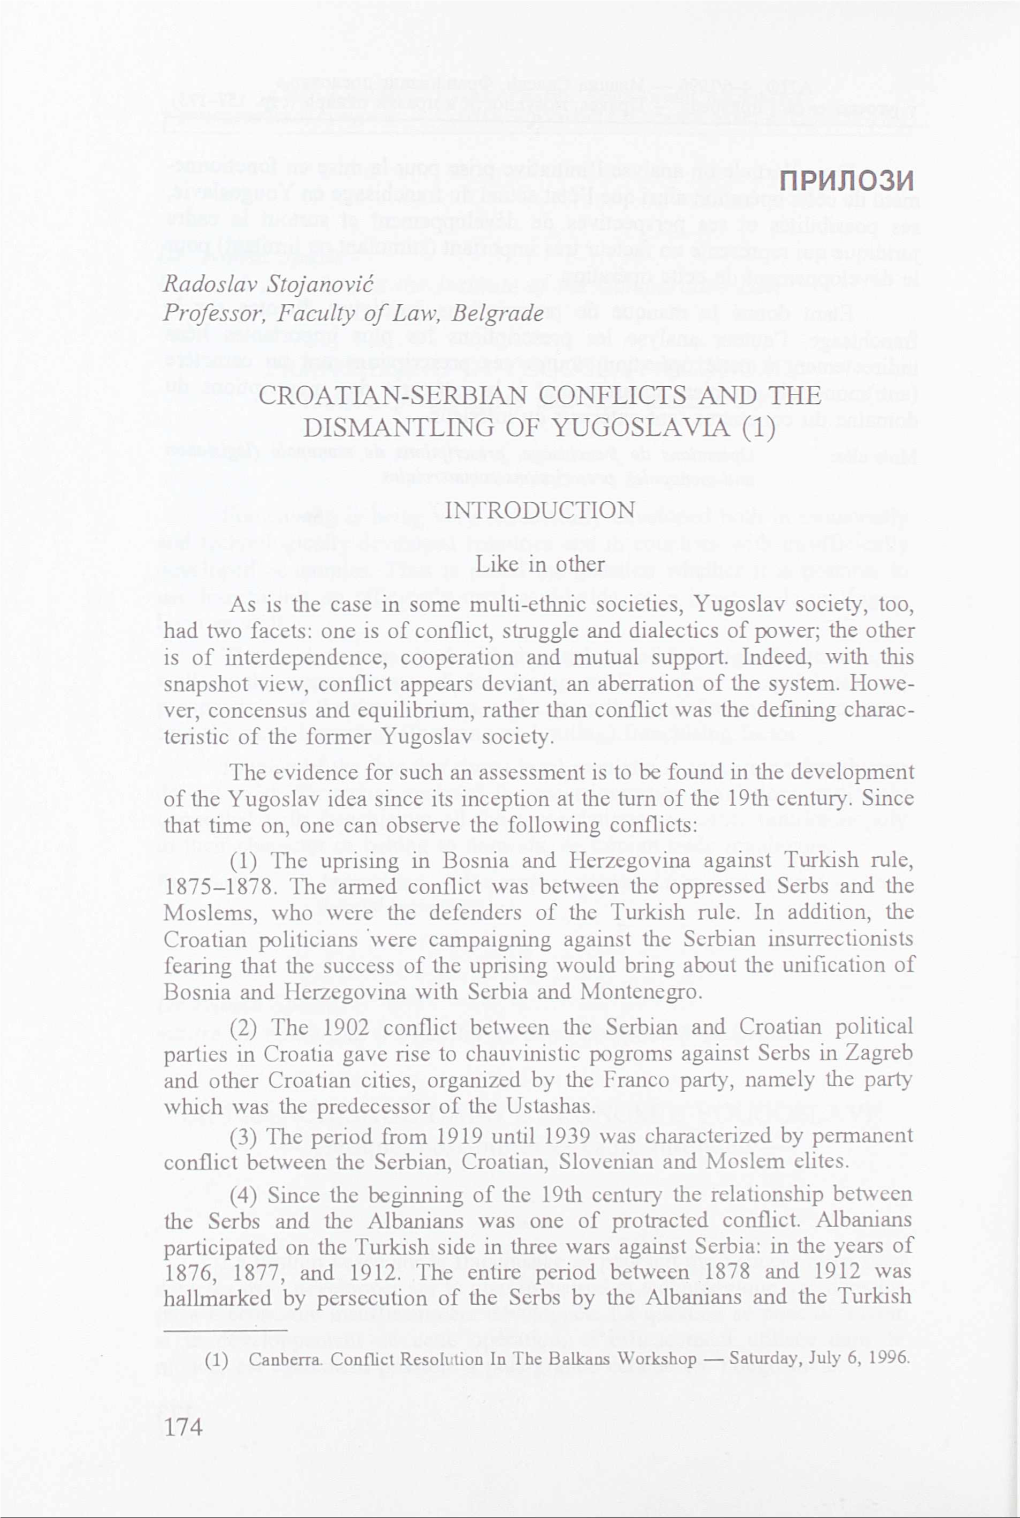 Croatian-Serbian Conflicts and the Dismantling of Yugoslavia (1)